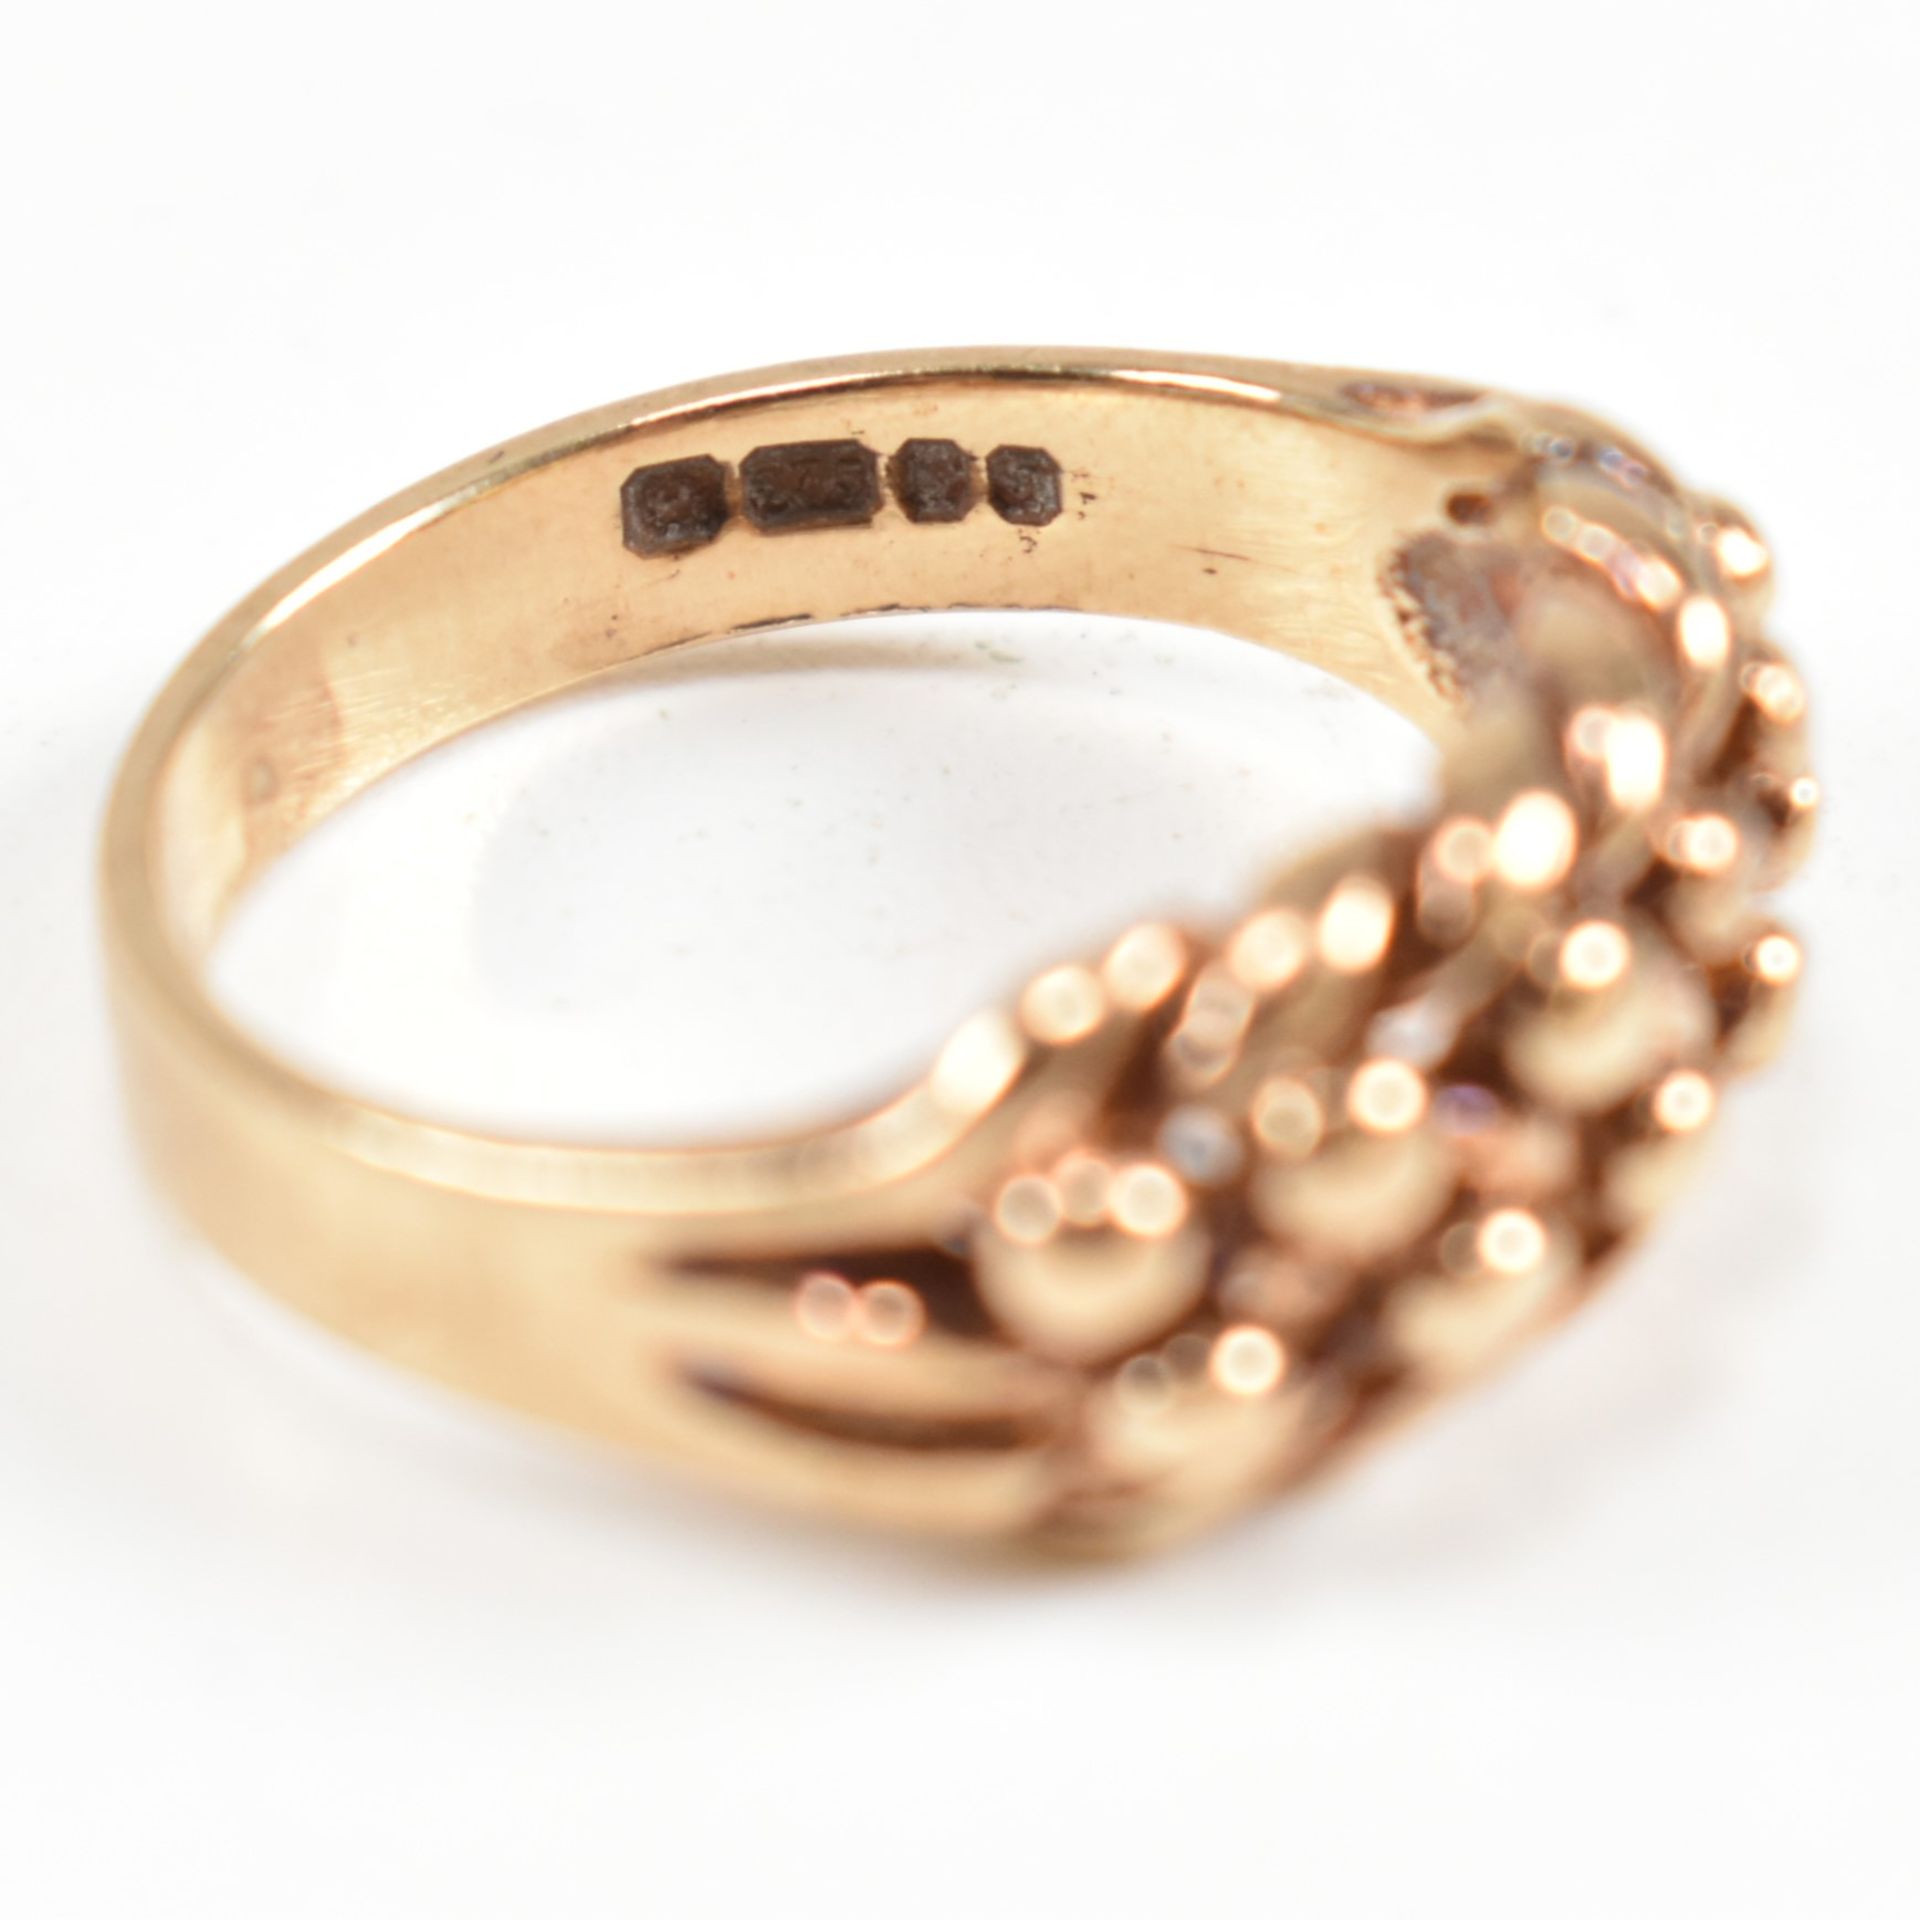 HALLMARKED 9CT GOLD KEEPER RING - Image 6 of 10